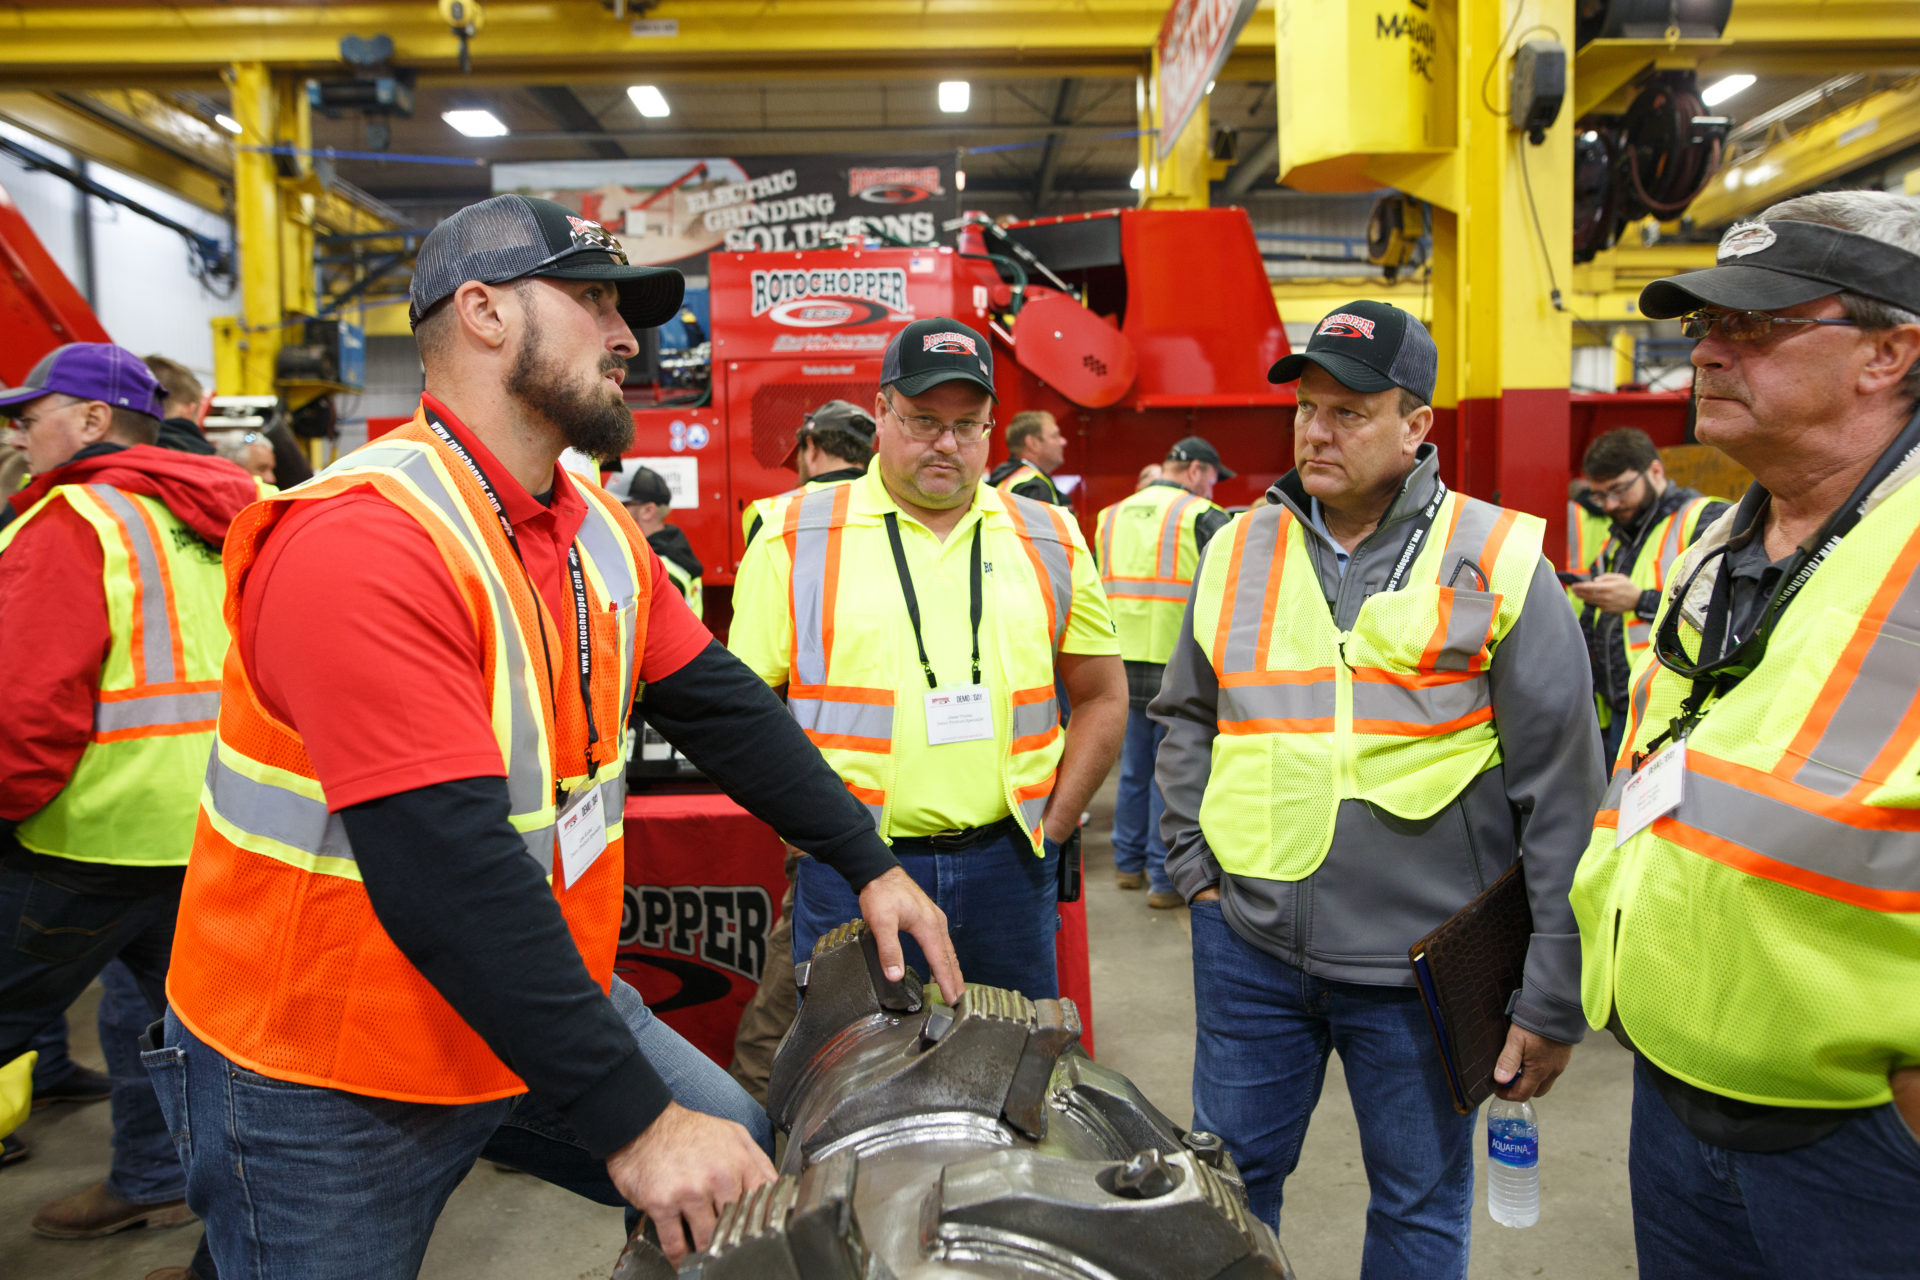 Man demonstrating large rotor component of a grinding machine to other men during Rotochopper's demo day event.